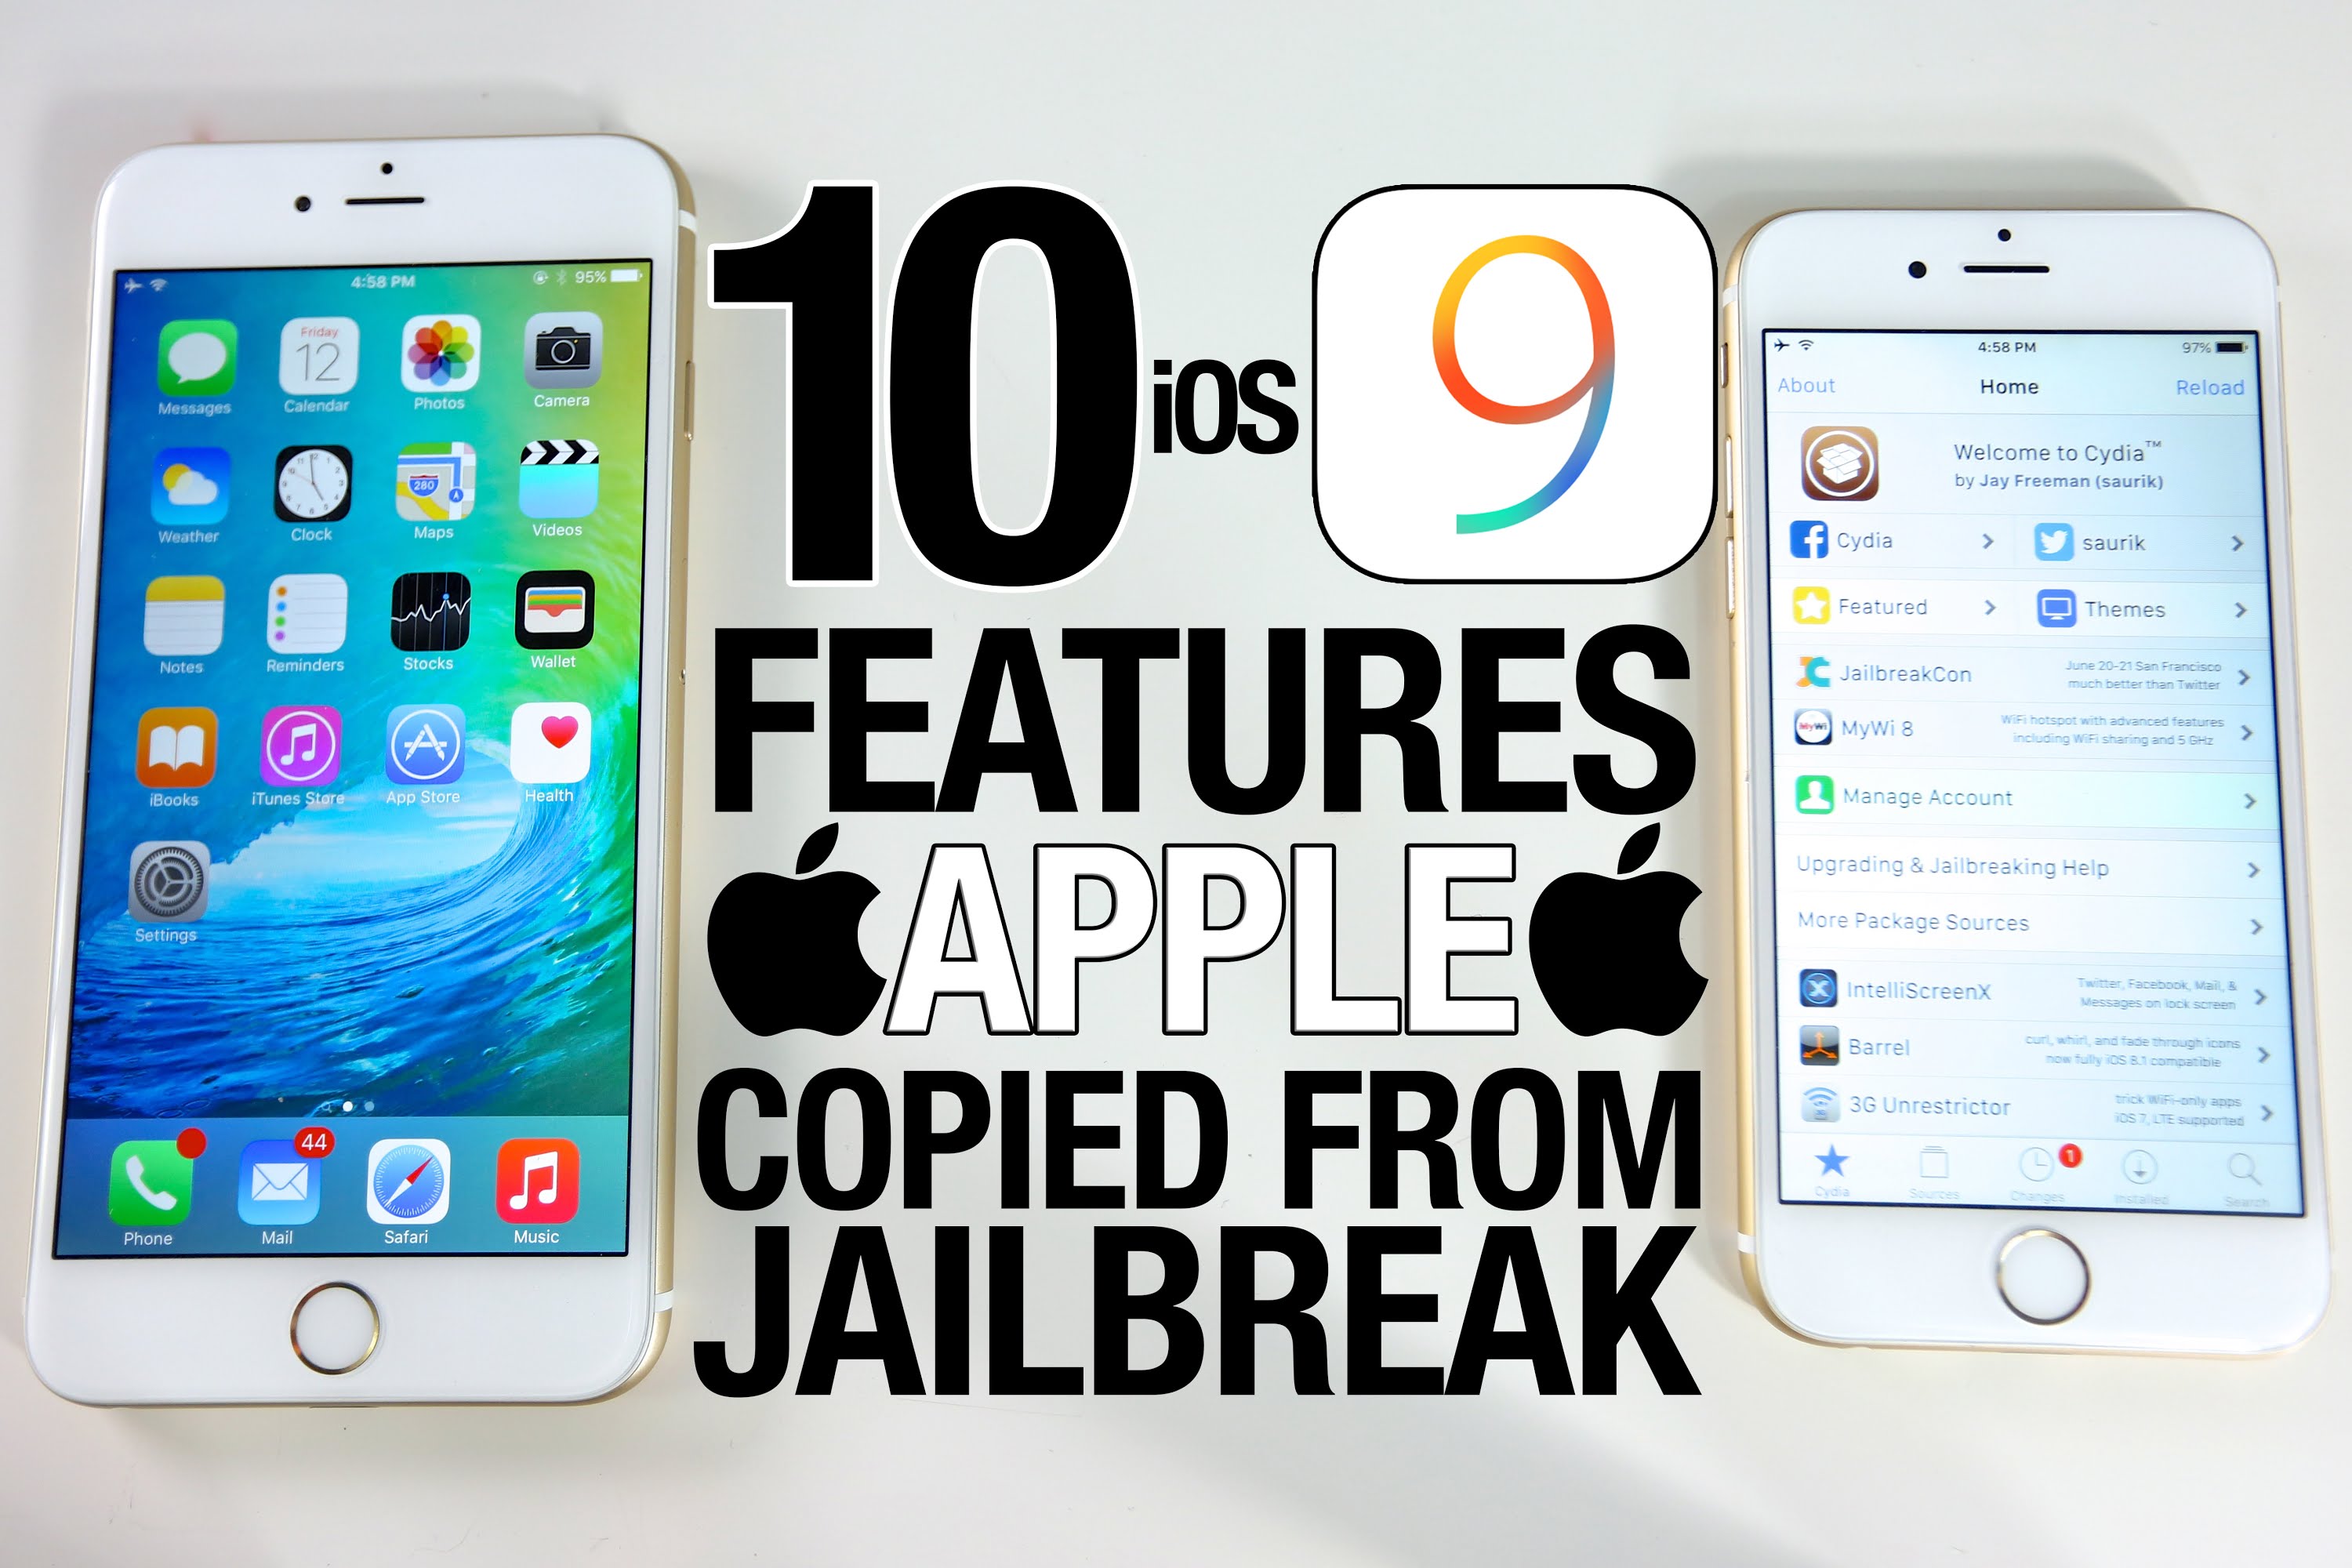 IOS 9 Cydia sources. Jailbreak iphone widgets. Apple copying. Features of IOS\. Featured 9